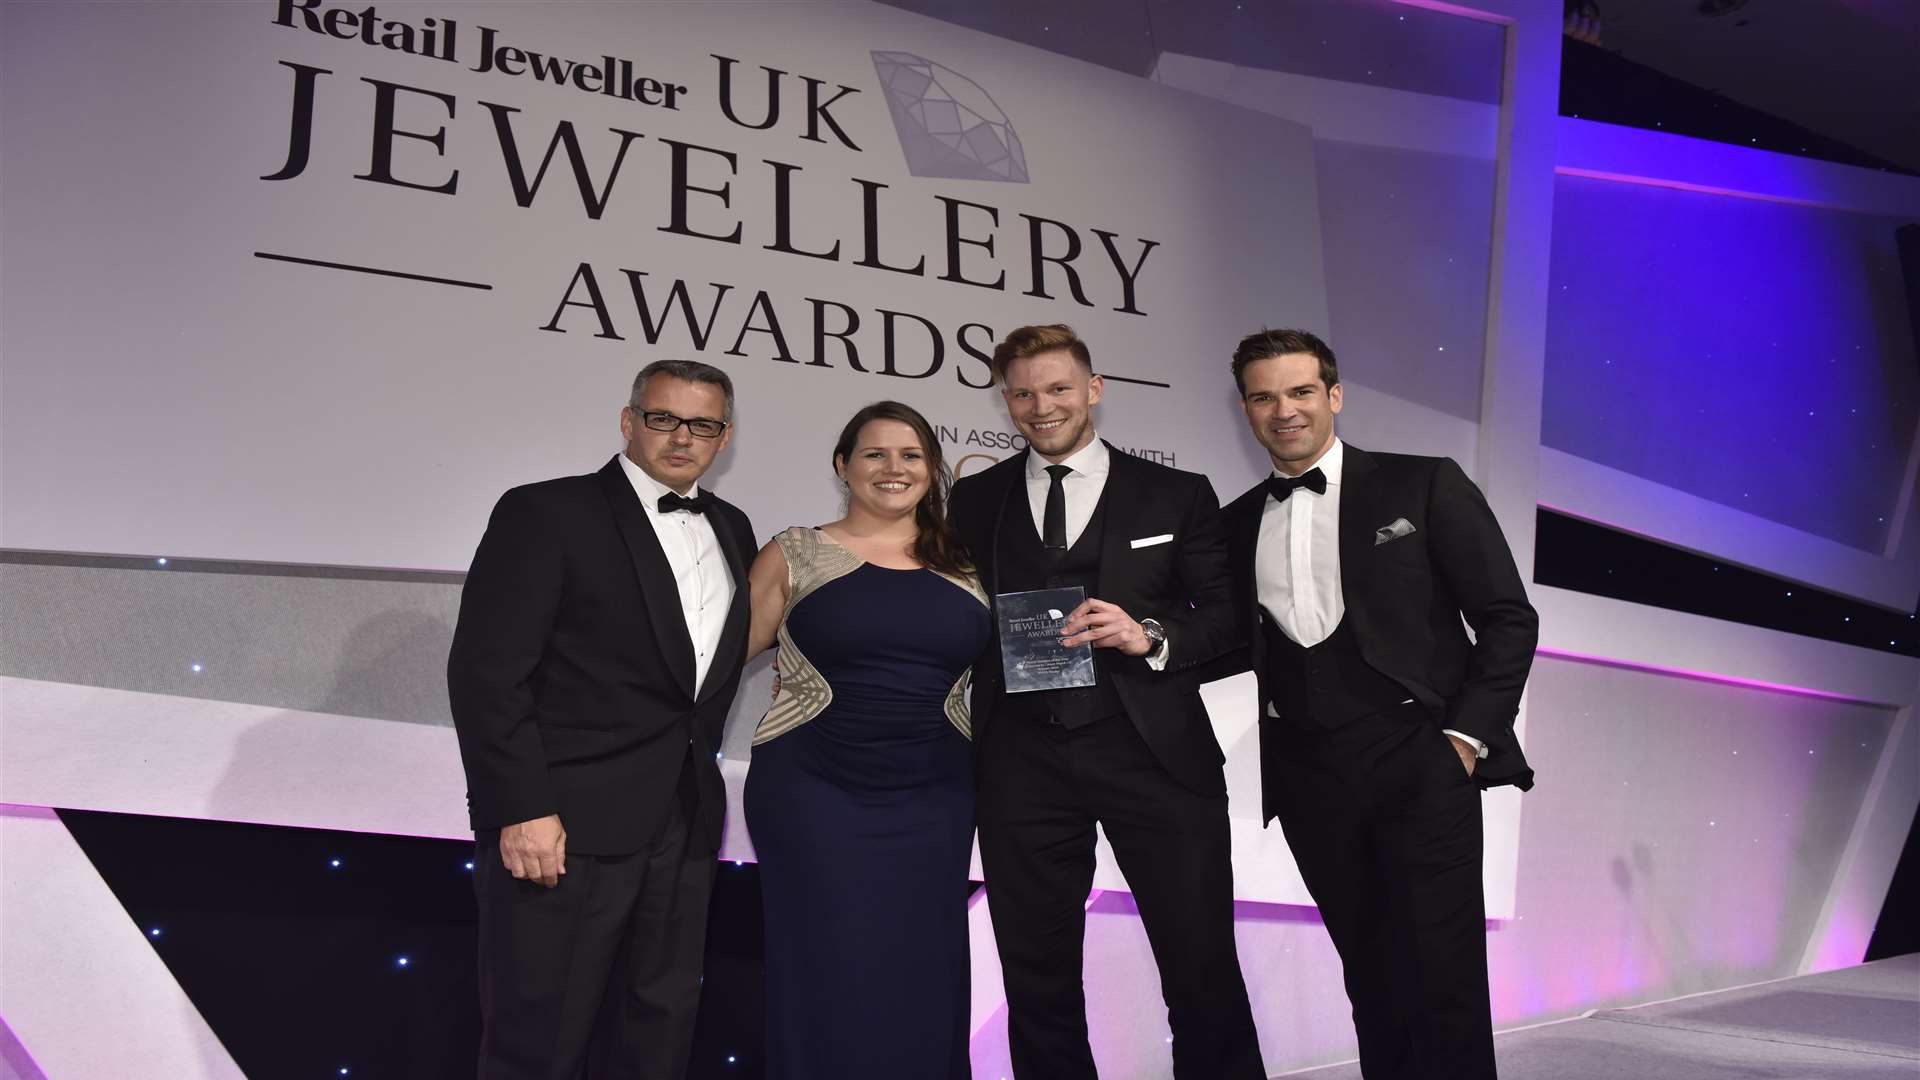 TV presenter Gethin Jones, right, presents Watchfinder's flagship store manager Robert Brooks, centre right, and deputy head of retail operations Ashlee Eastes, centre left, with their award